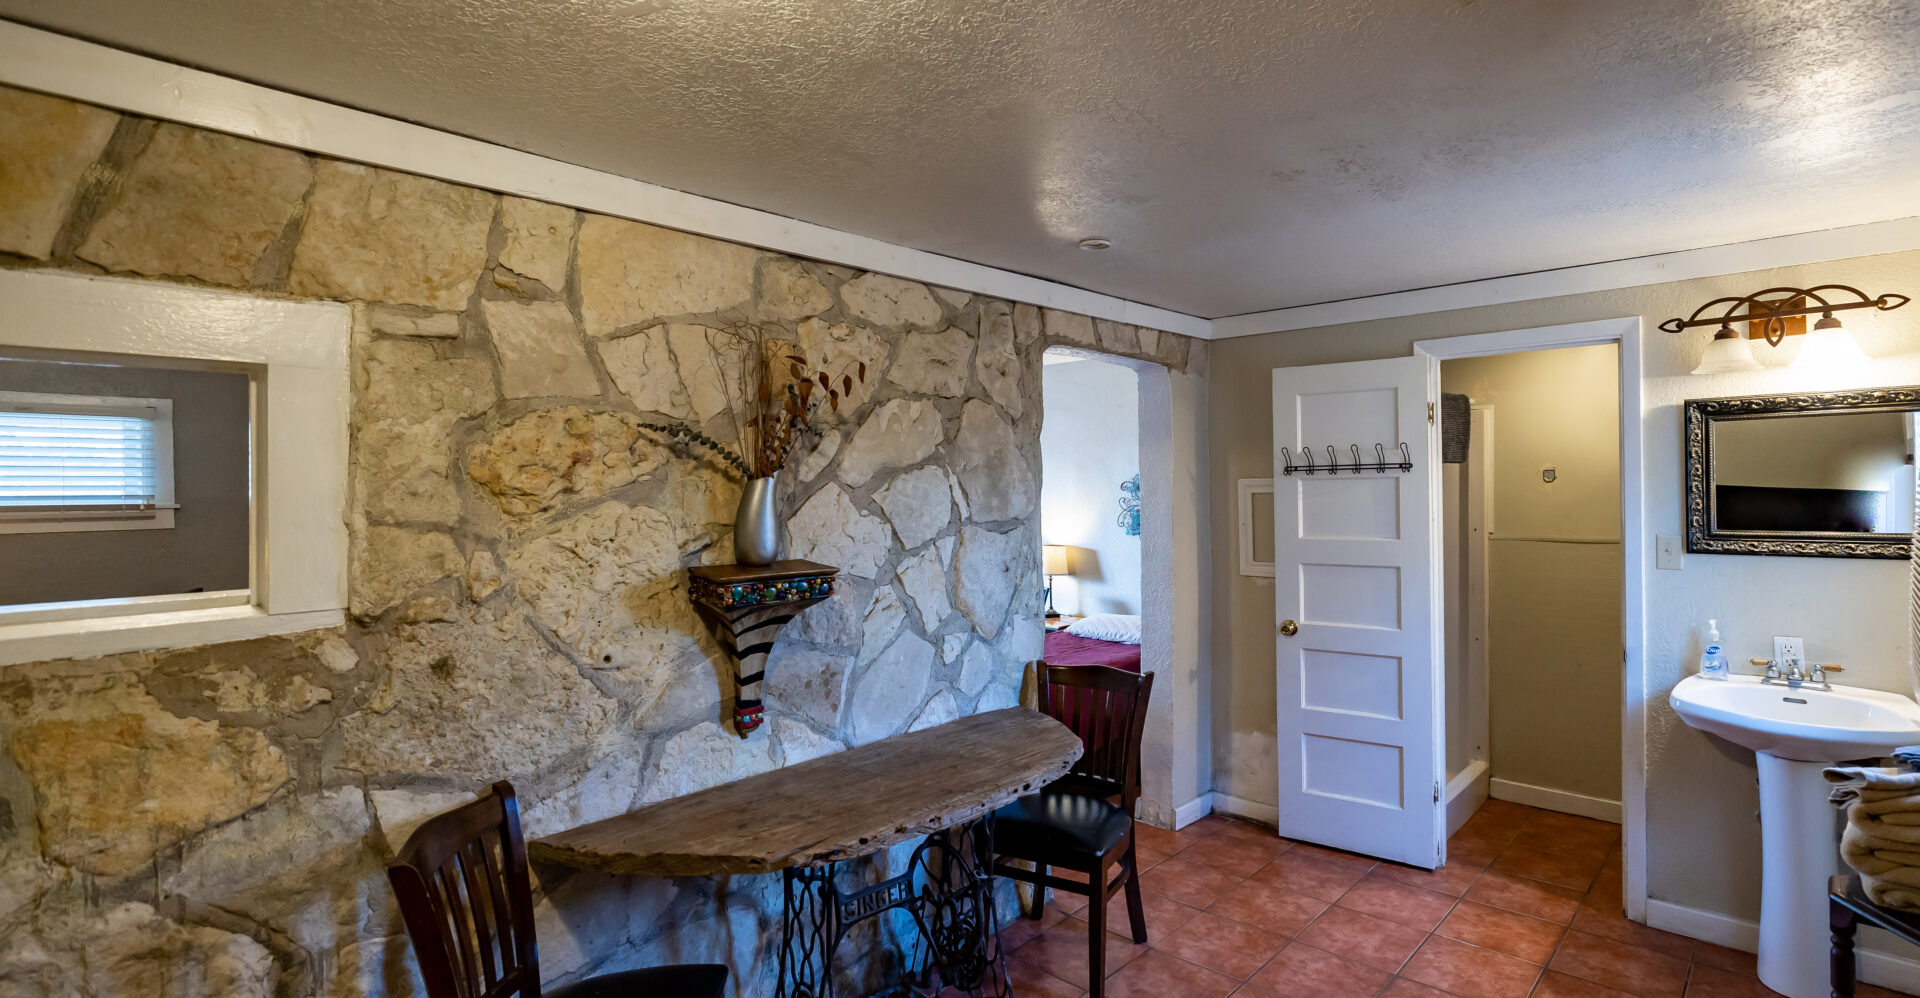 A inside of a house with stone wall design and white interiors